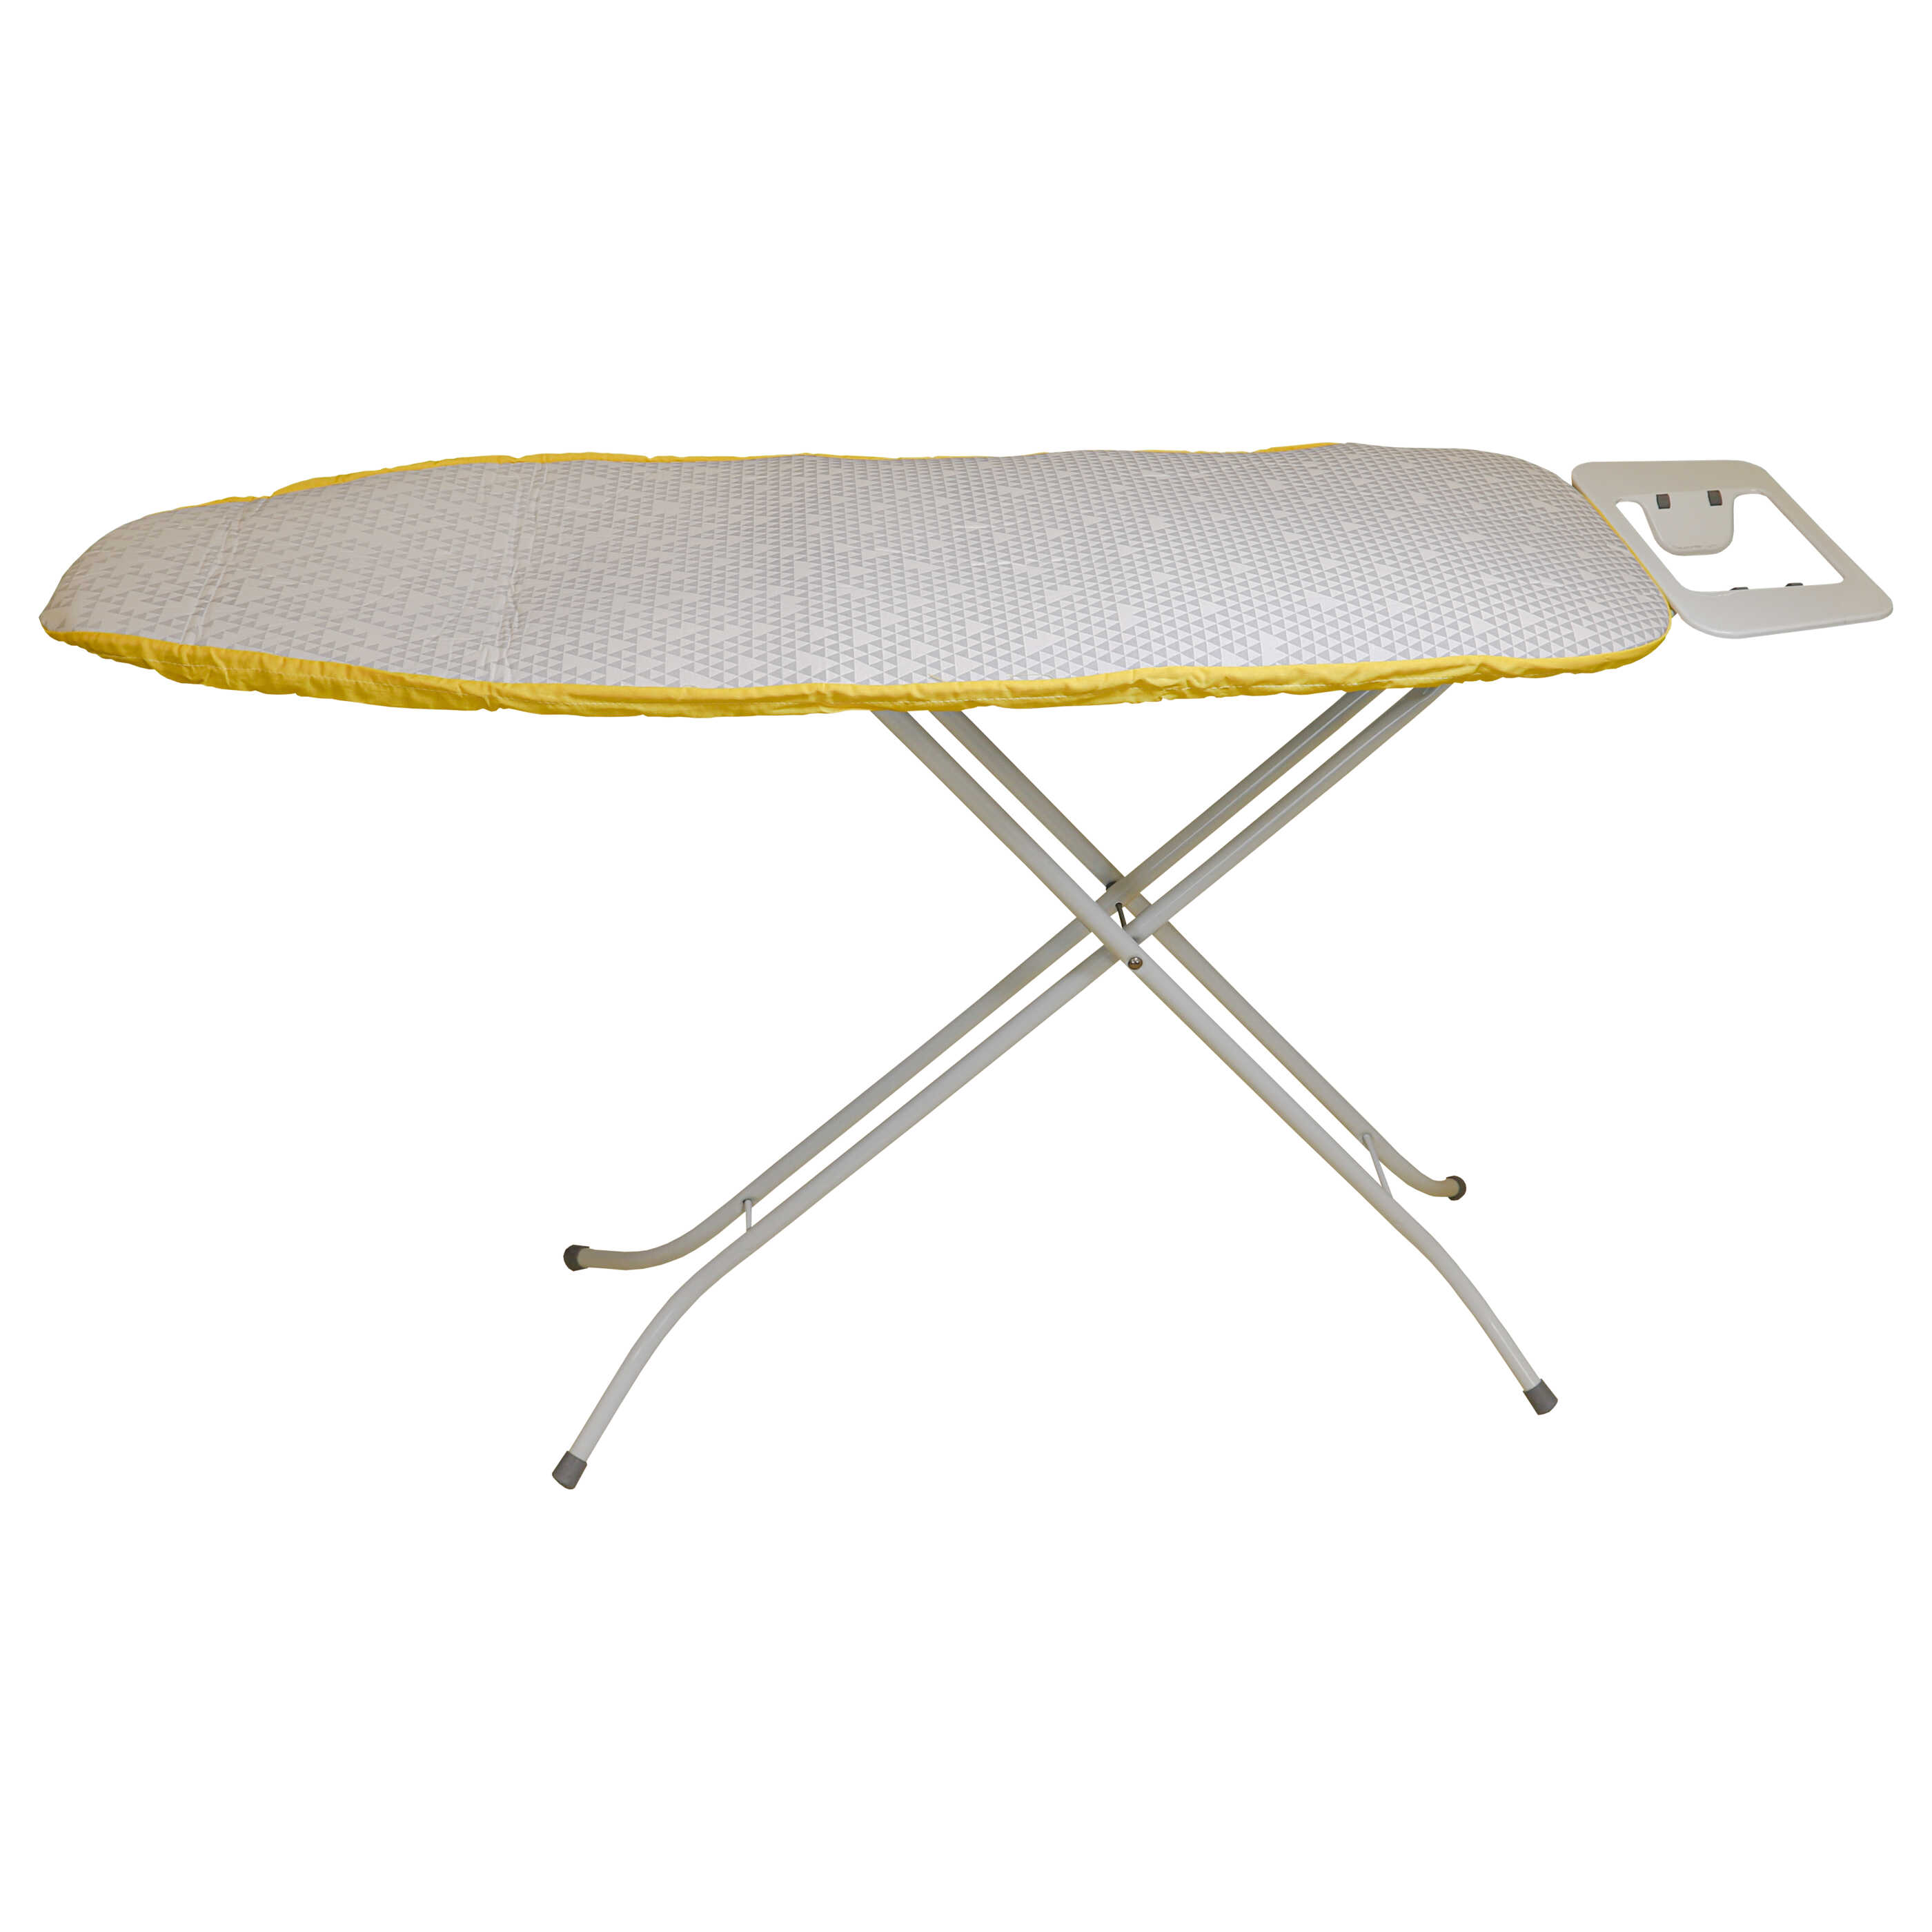 Ironing Board Cover as Exchange for Kärcher 2.884-969.0 suitable for Kärcher Active Ironing Board